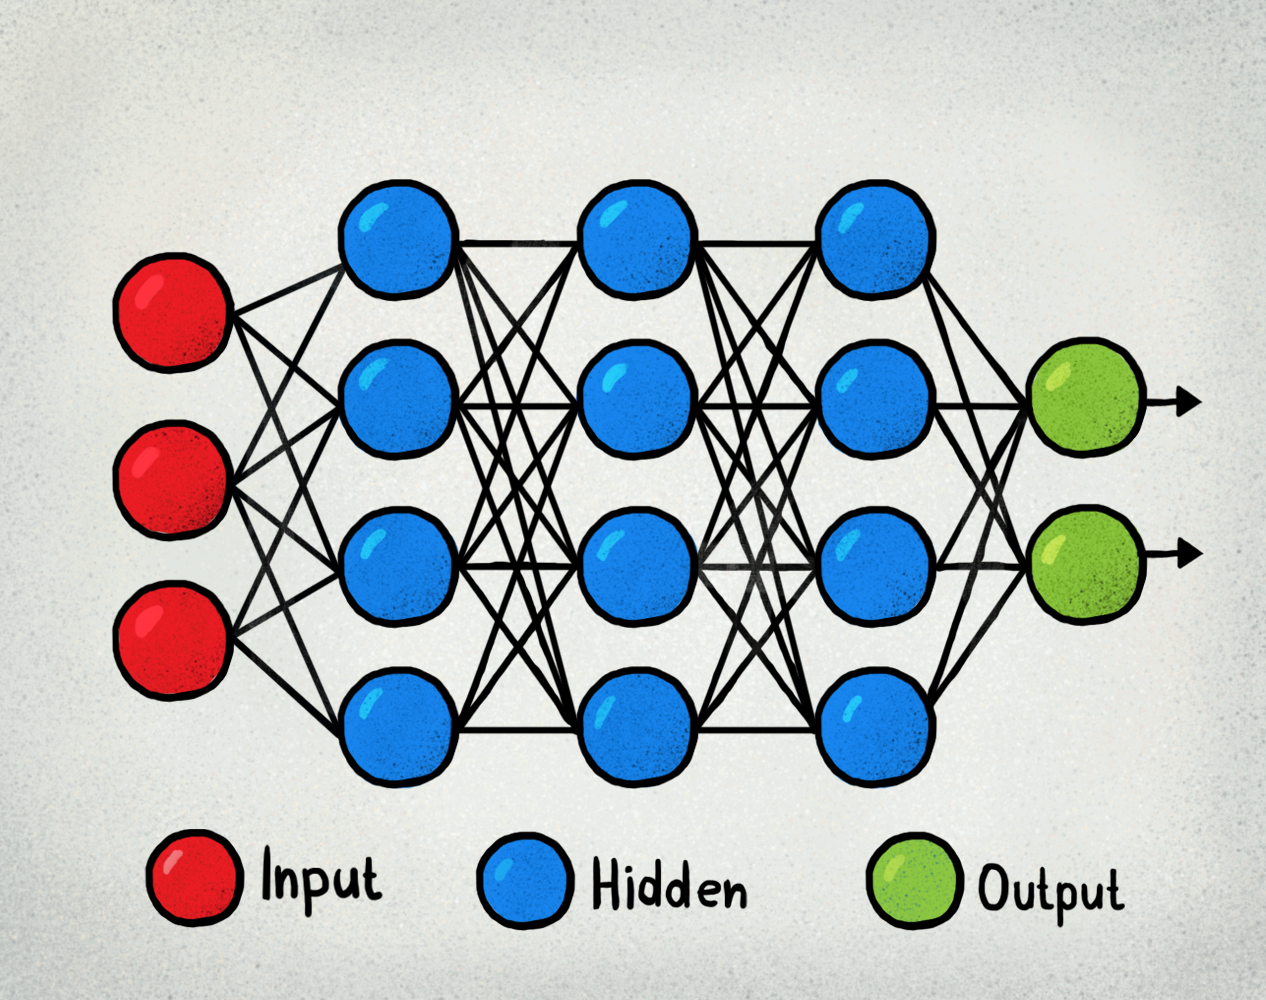 A neural network with an input layer, 3 hidden layers, and an output layer.